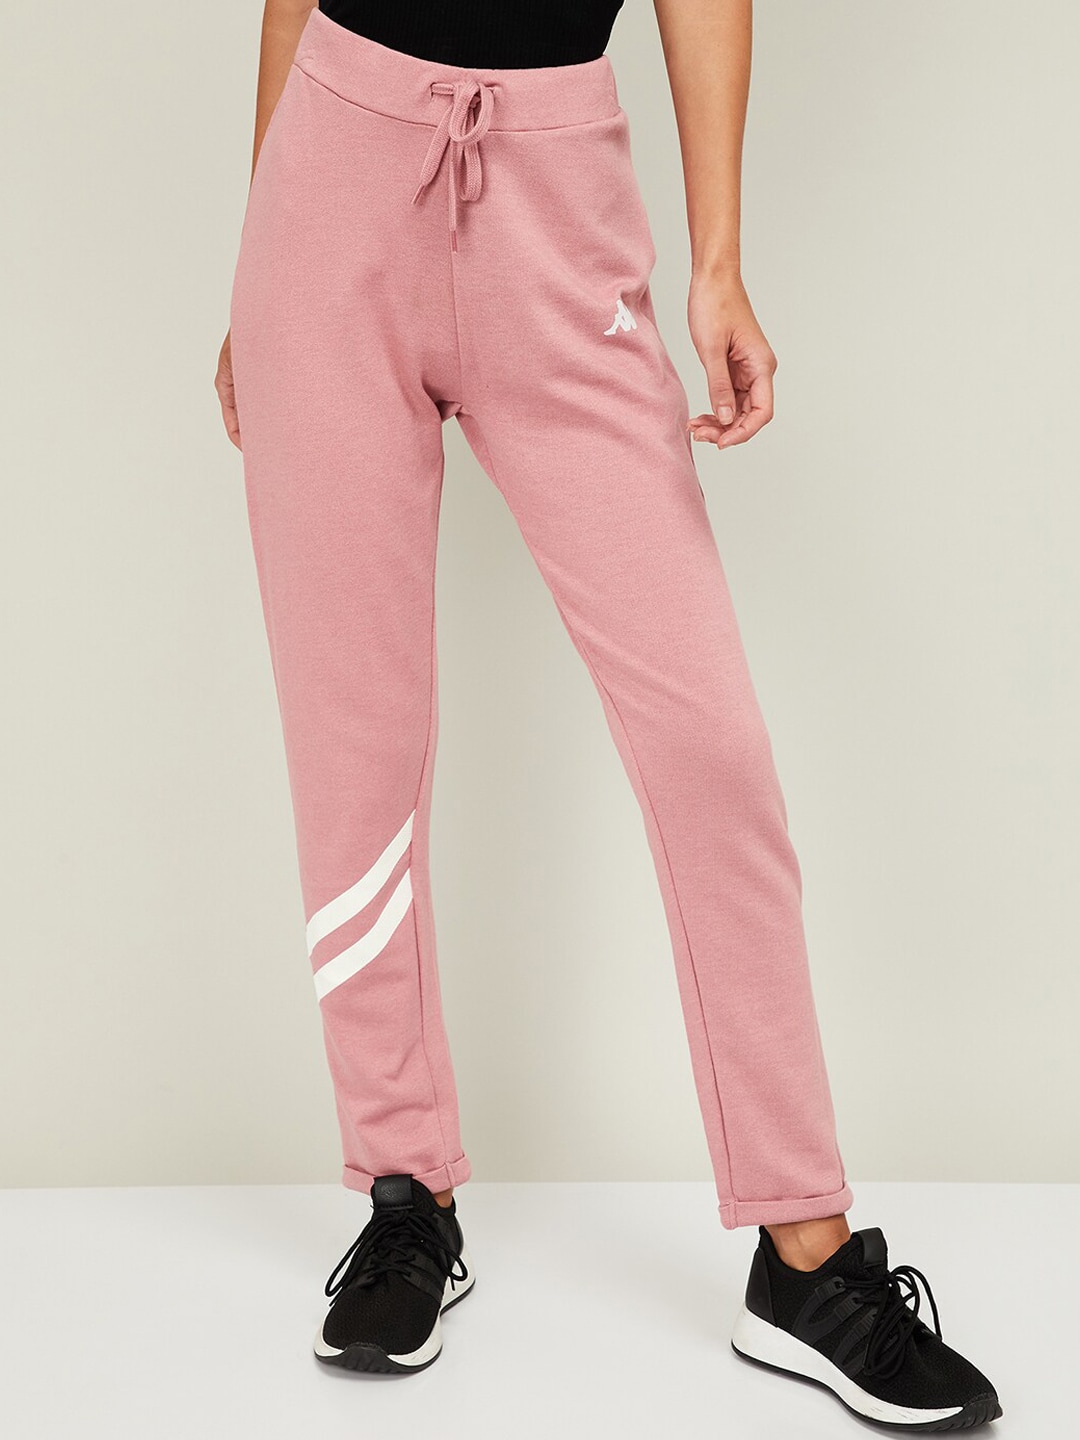 Kappa Women Pink Solid Track Pants Price in India